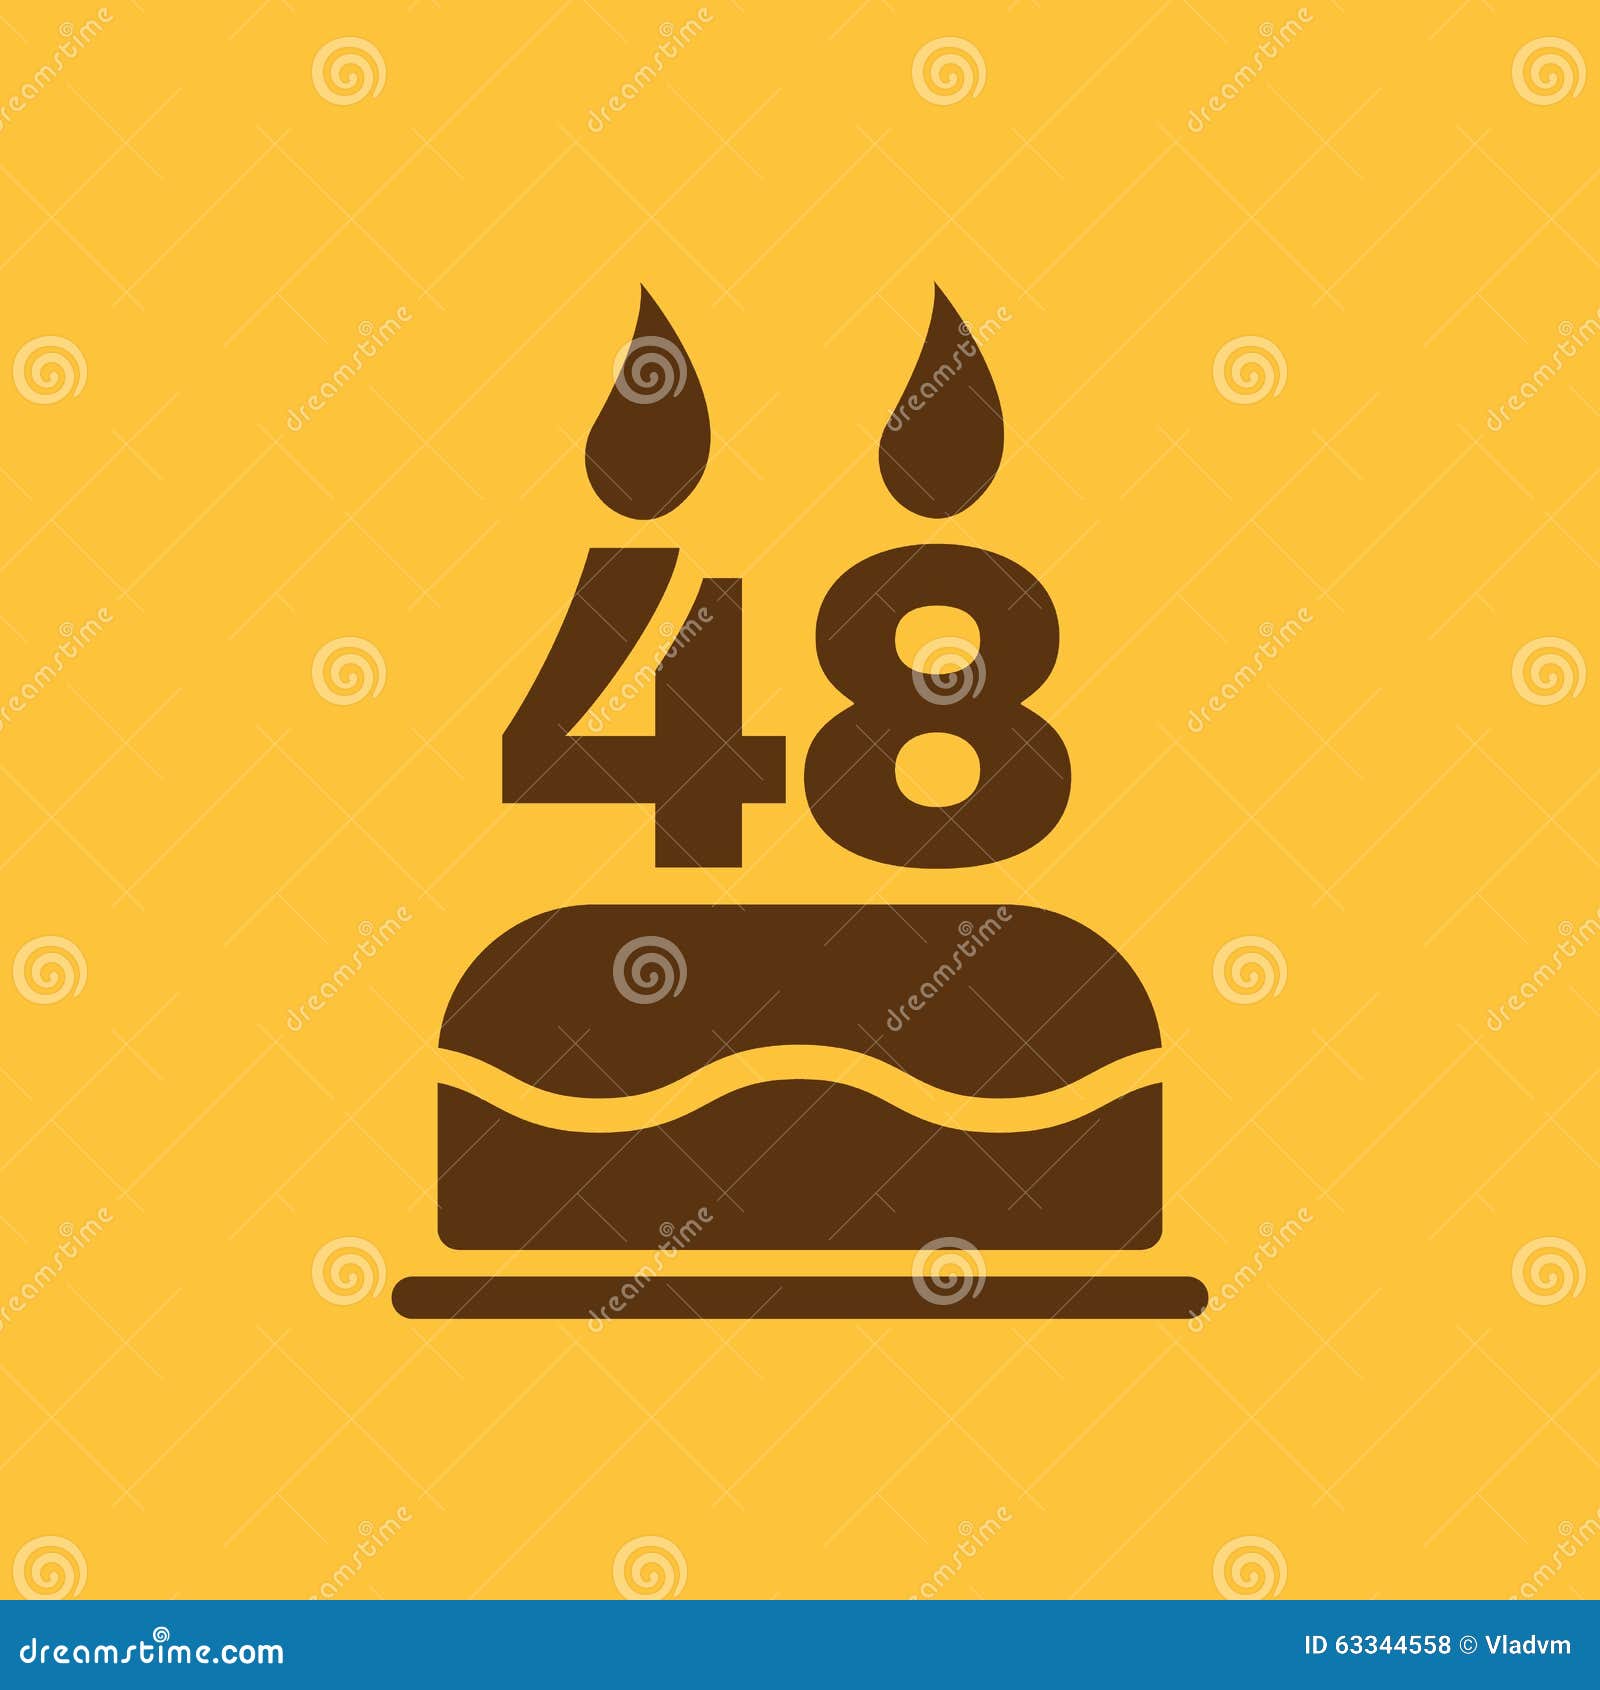 Birthday Cake Cakes Vector Hd Images Birthday Cake Icon For Your Project  Project Icons Birthday Icons Cake Icons PNG Image For Free Download